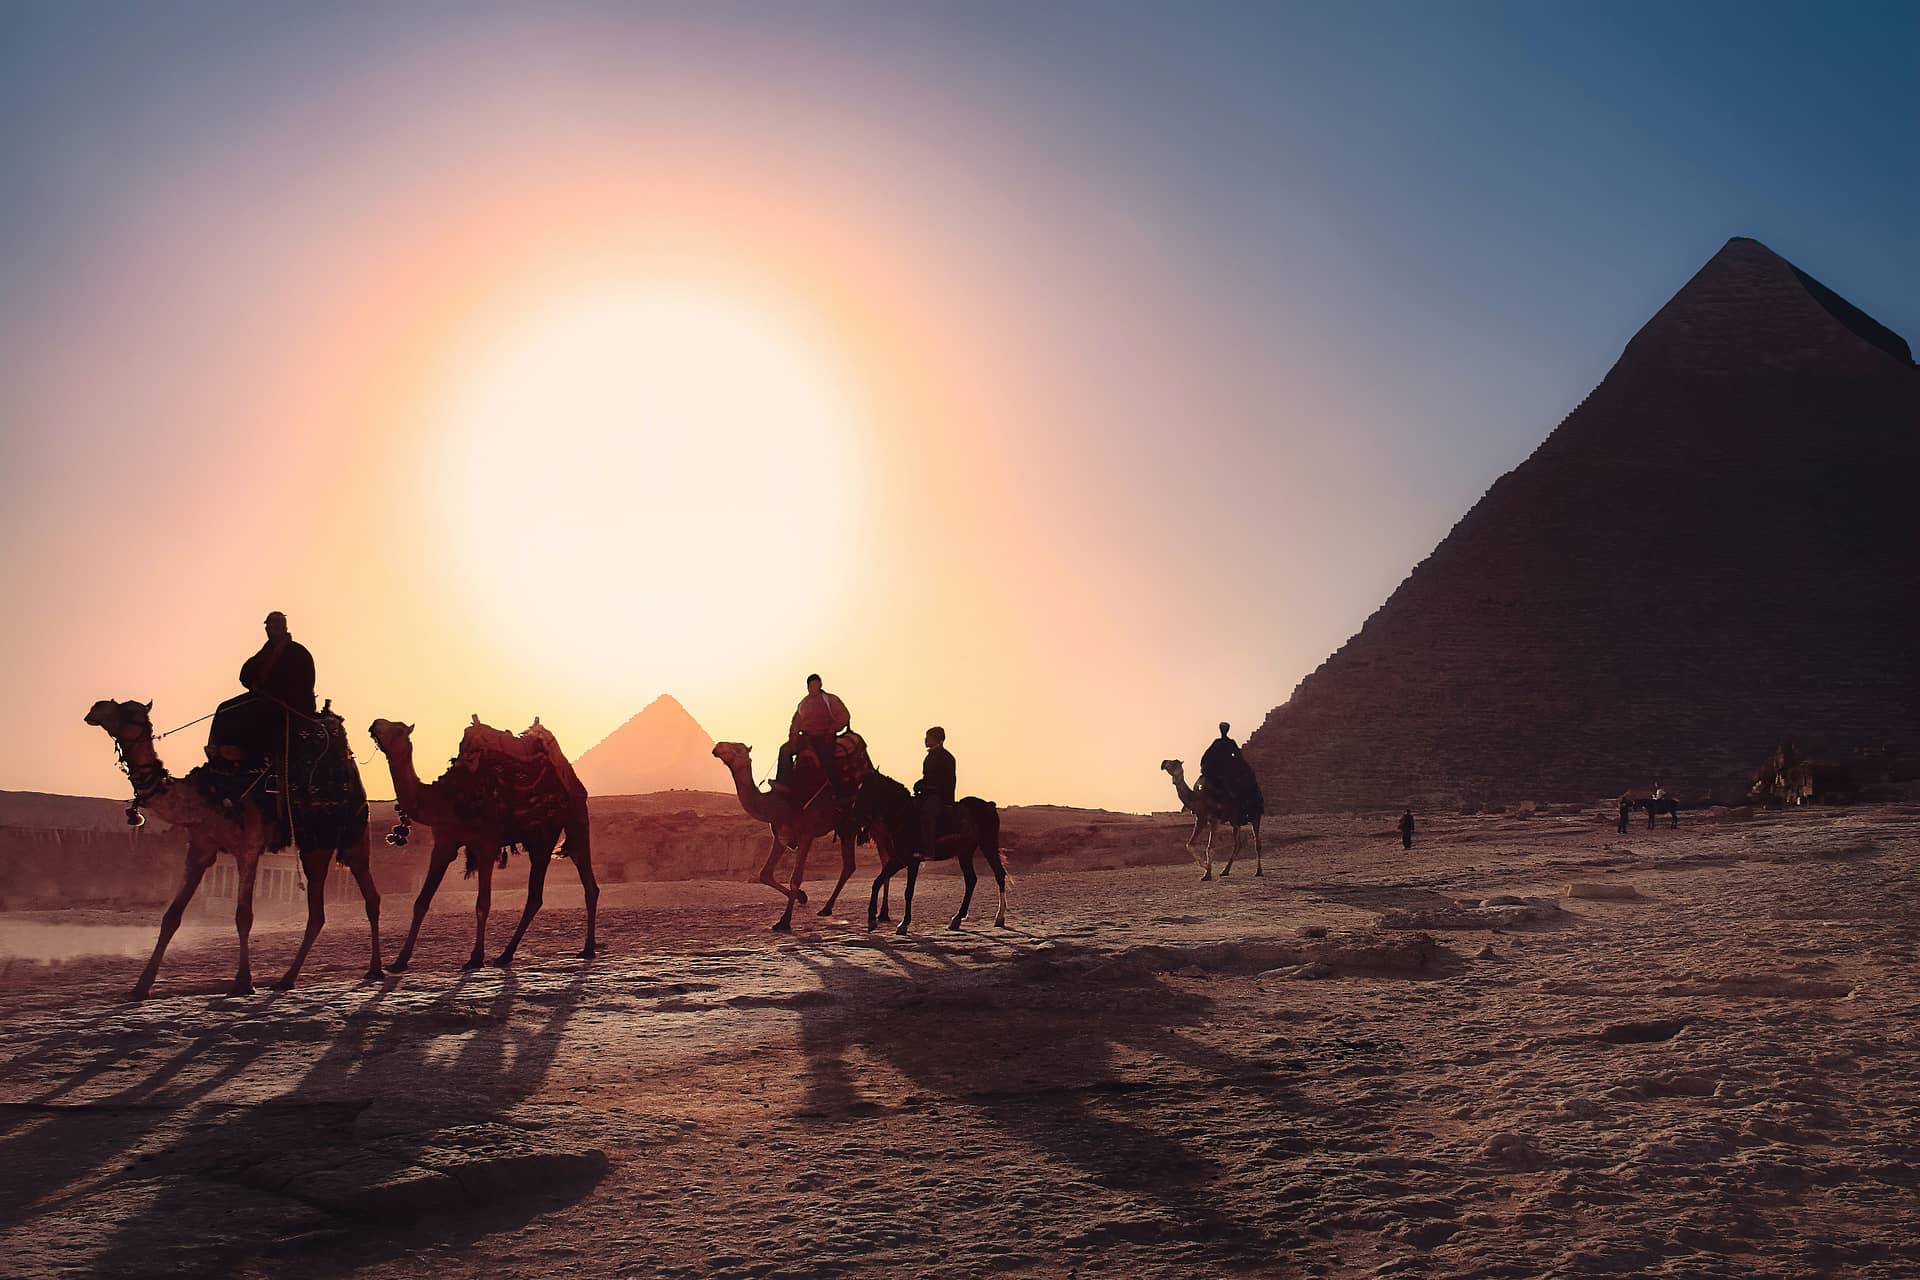 Sunset in Egypt - Places to Watch Sunsets